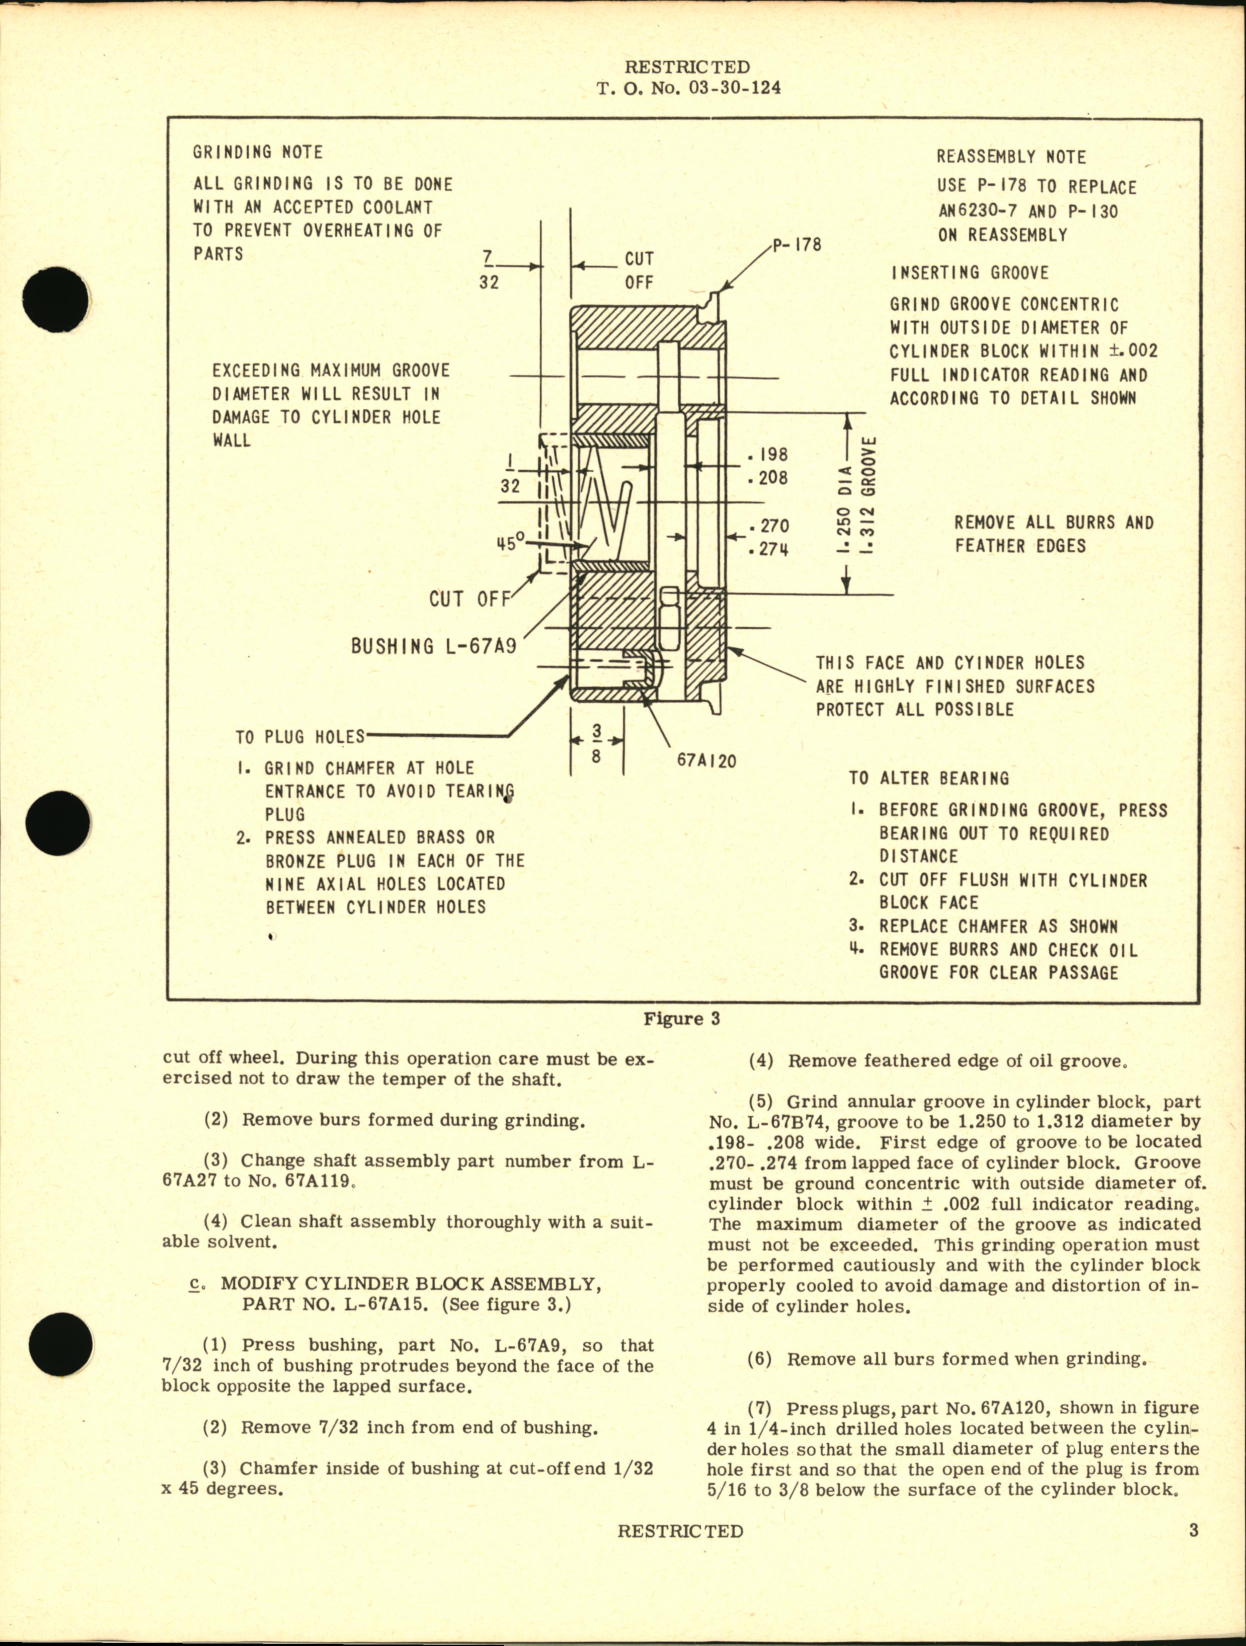 Sample page 3 from AirCorps Library document: Air and Hydraulic Equipment Conversion of Model L-681C1 Strato-Power Hydraulic Pump to Model L-681C1J New York Air Brake